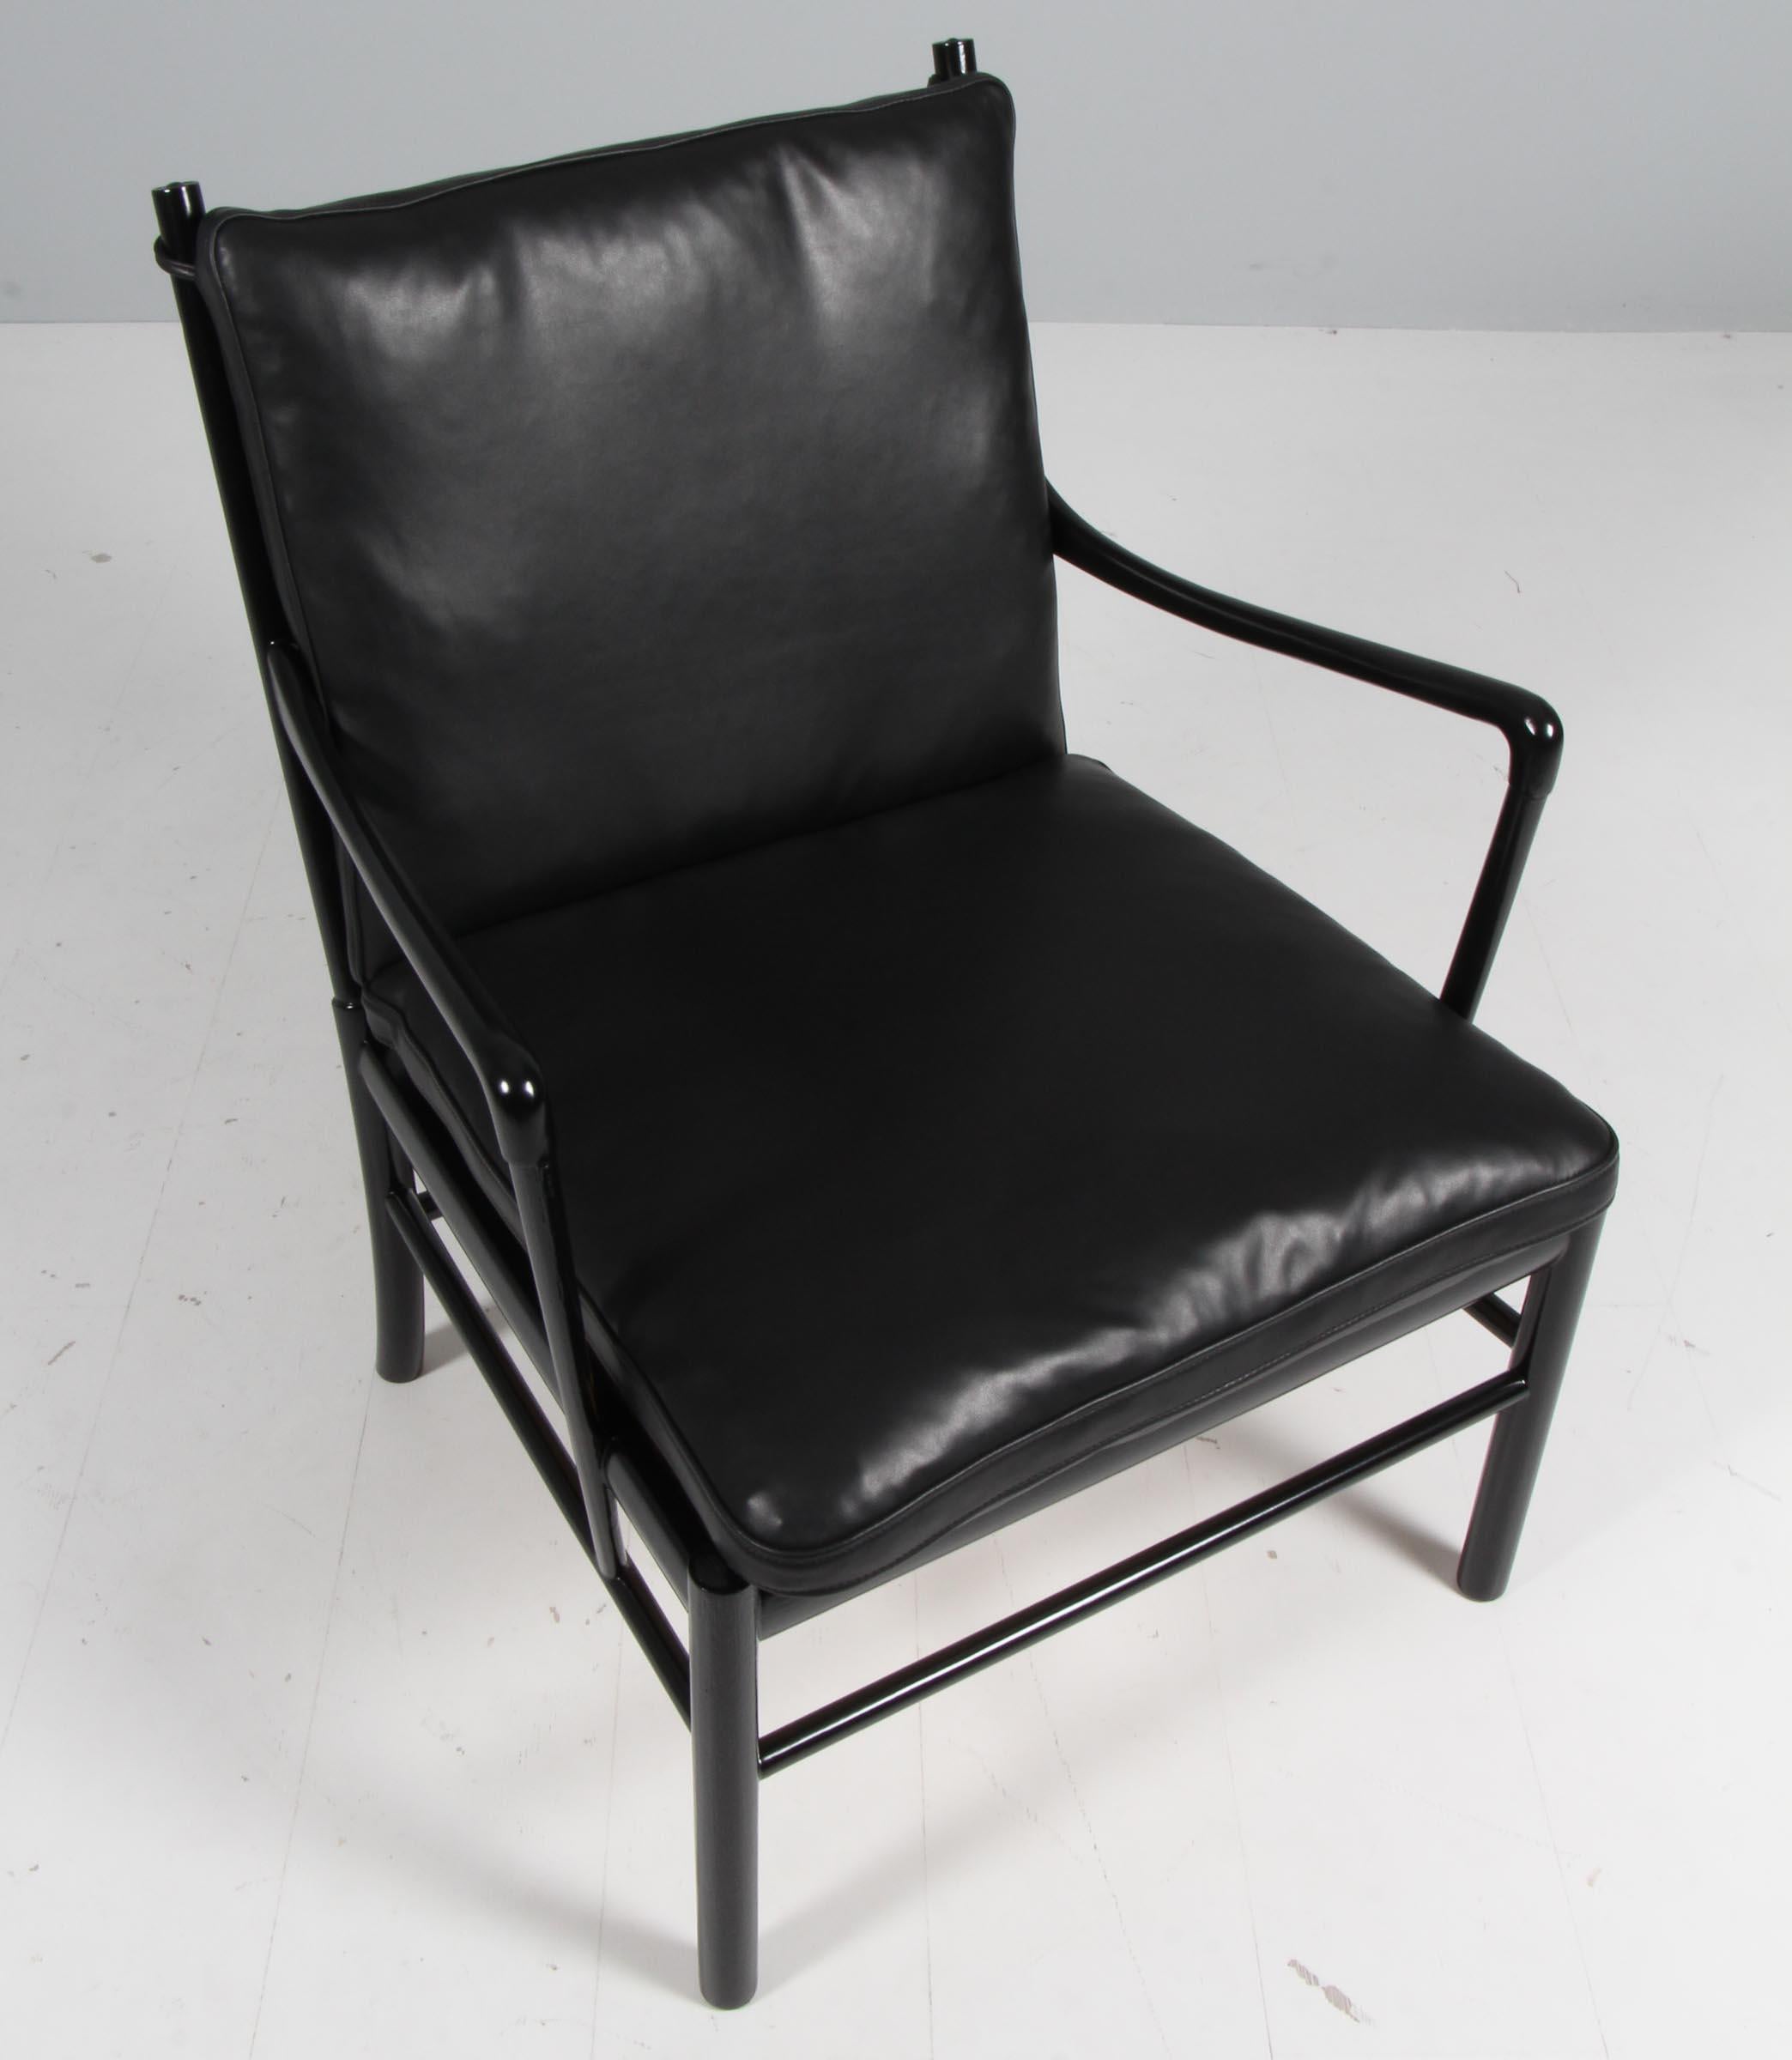 Ole Wanscher lounge chair new upholstered with black aniline leather.

Made of new black painted ash. 

Model colonial chair, made by Poul Jeppesen.